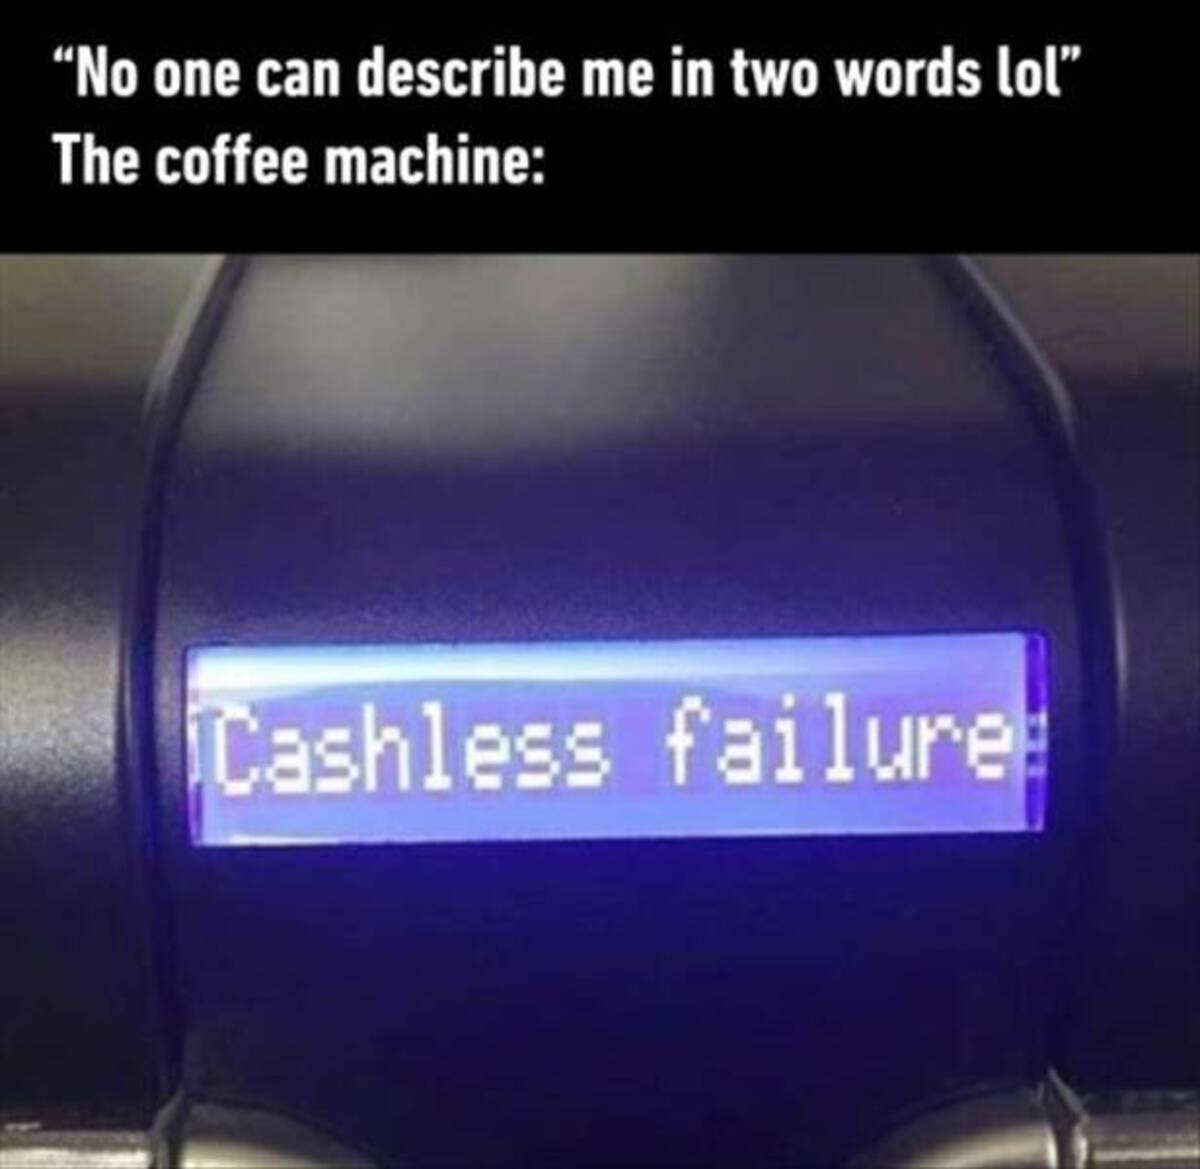 general motors - "No one can describe me in two words lol" The coffee machine Cashless failure